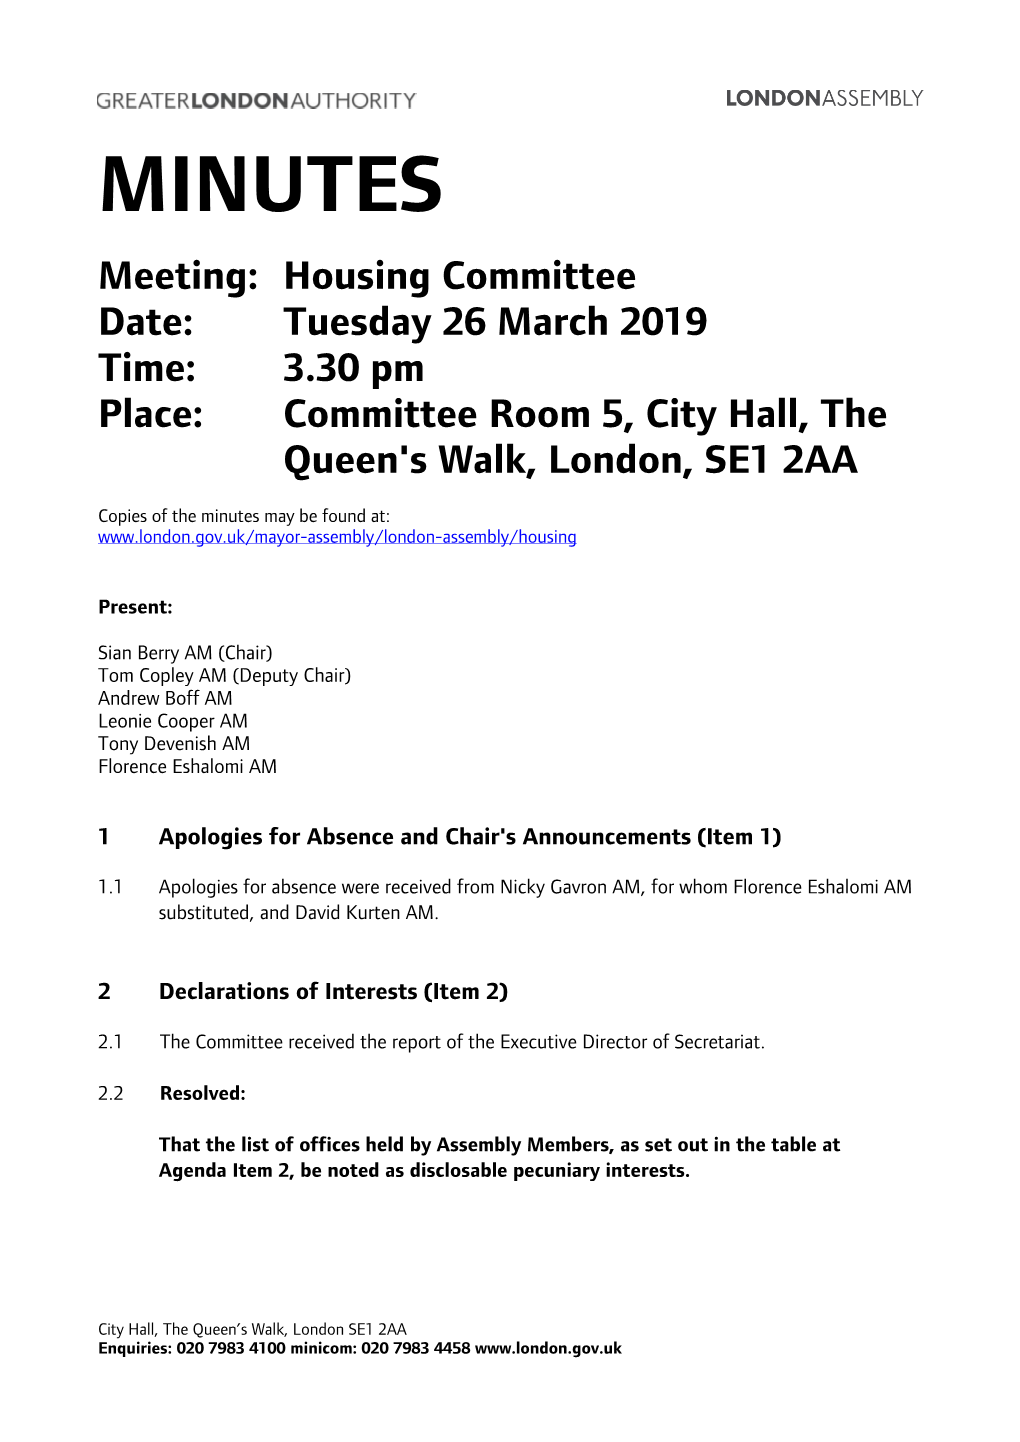 Minutes Document for Housing Committee, 26/03/2019 15:30